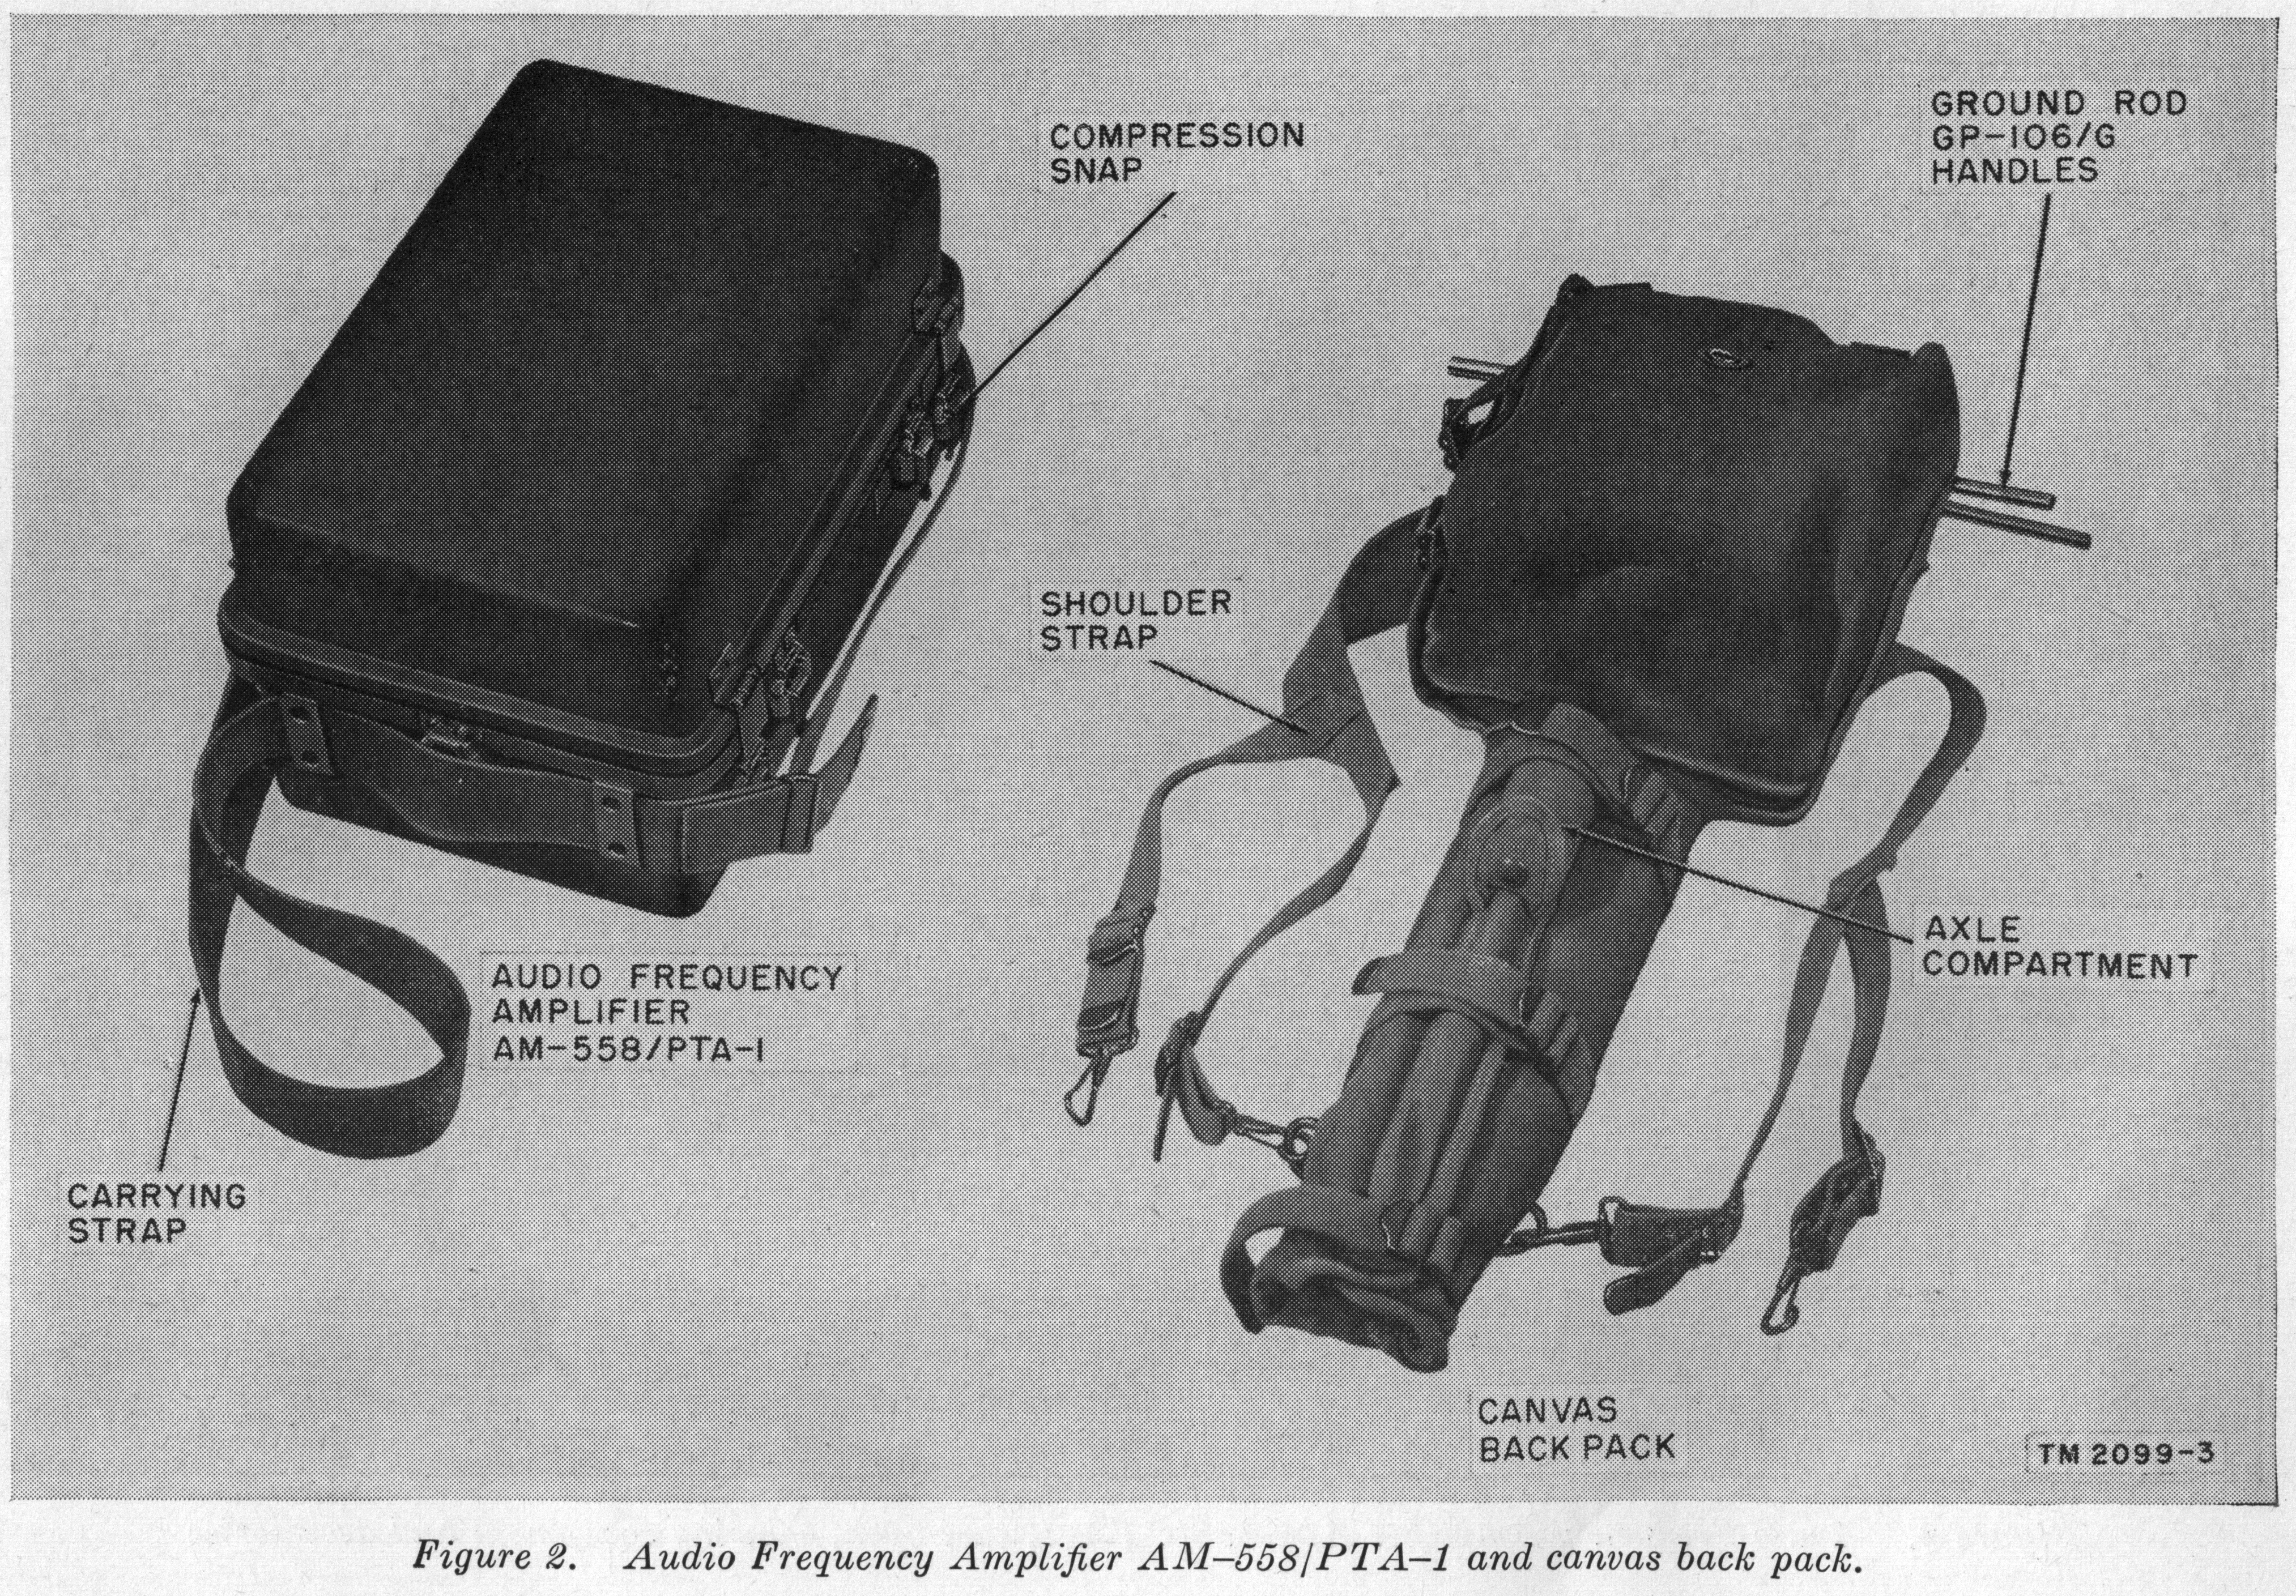 Audio Frequency Amplifier AM-558/PTA-1 and canvas back pack.